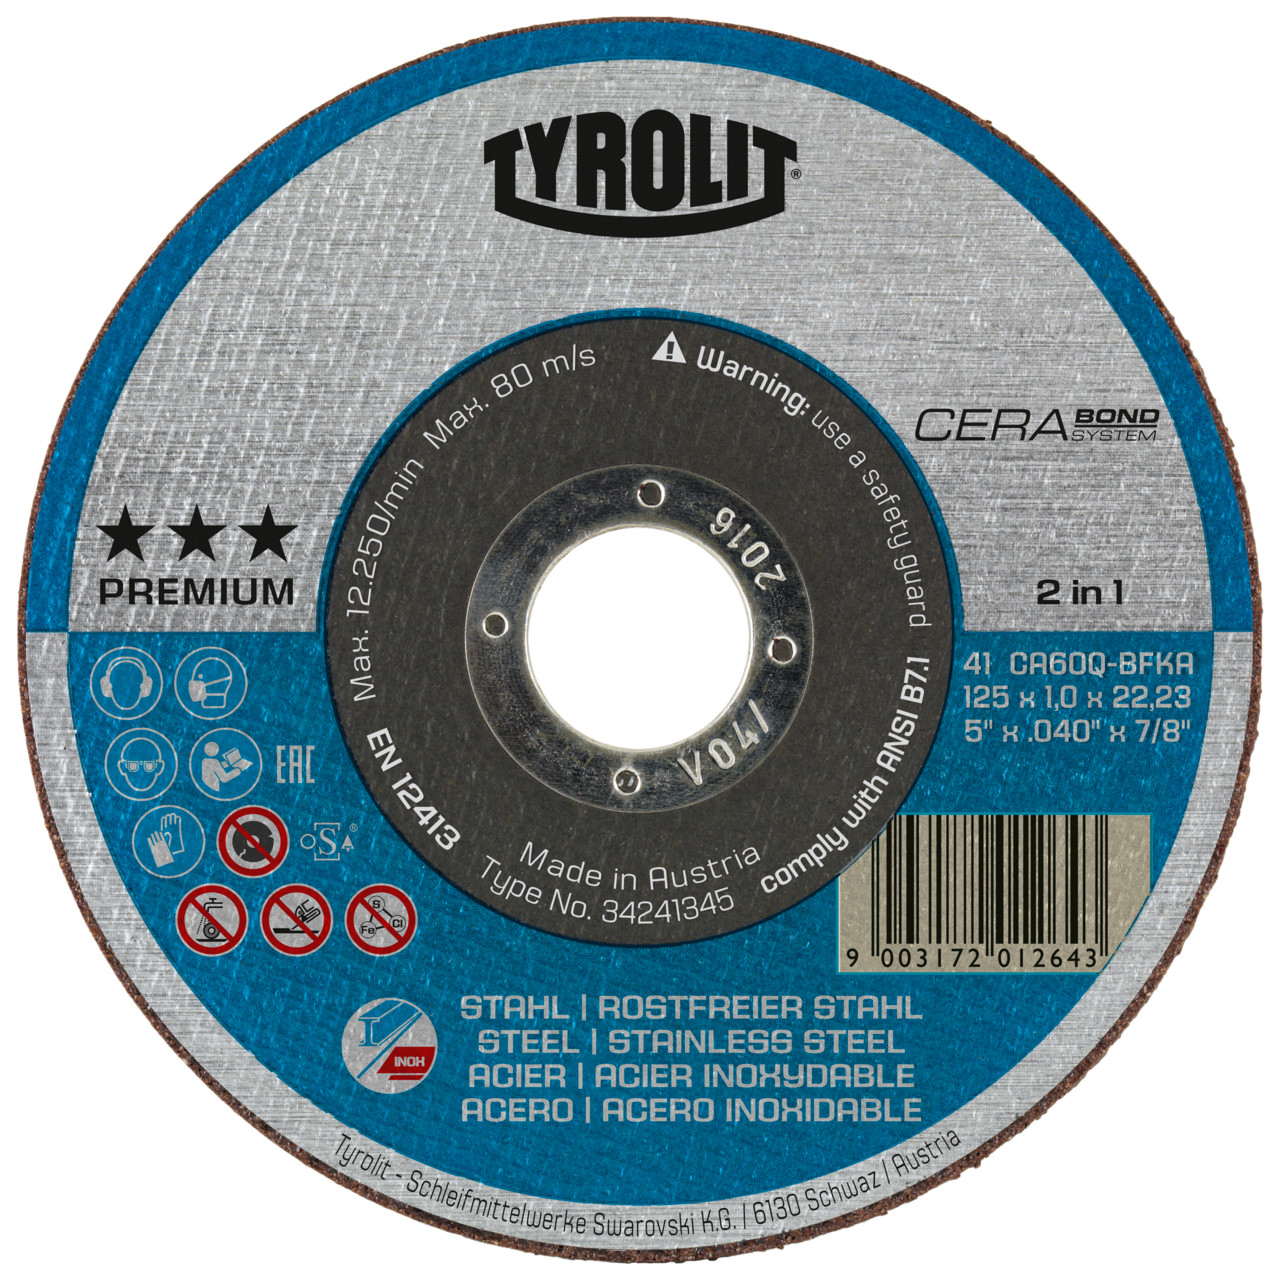 TYROLIT CERABOND cut-off wheel DxDxH 115x1.0x22.23 2in1 for steel and stainless steel, shape: 41 - straight version, Art. 34241344